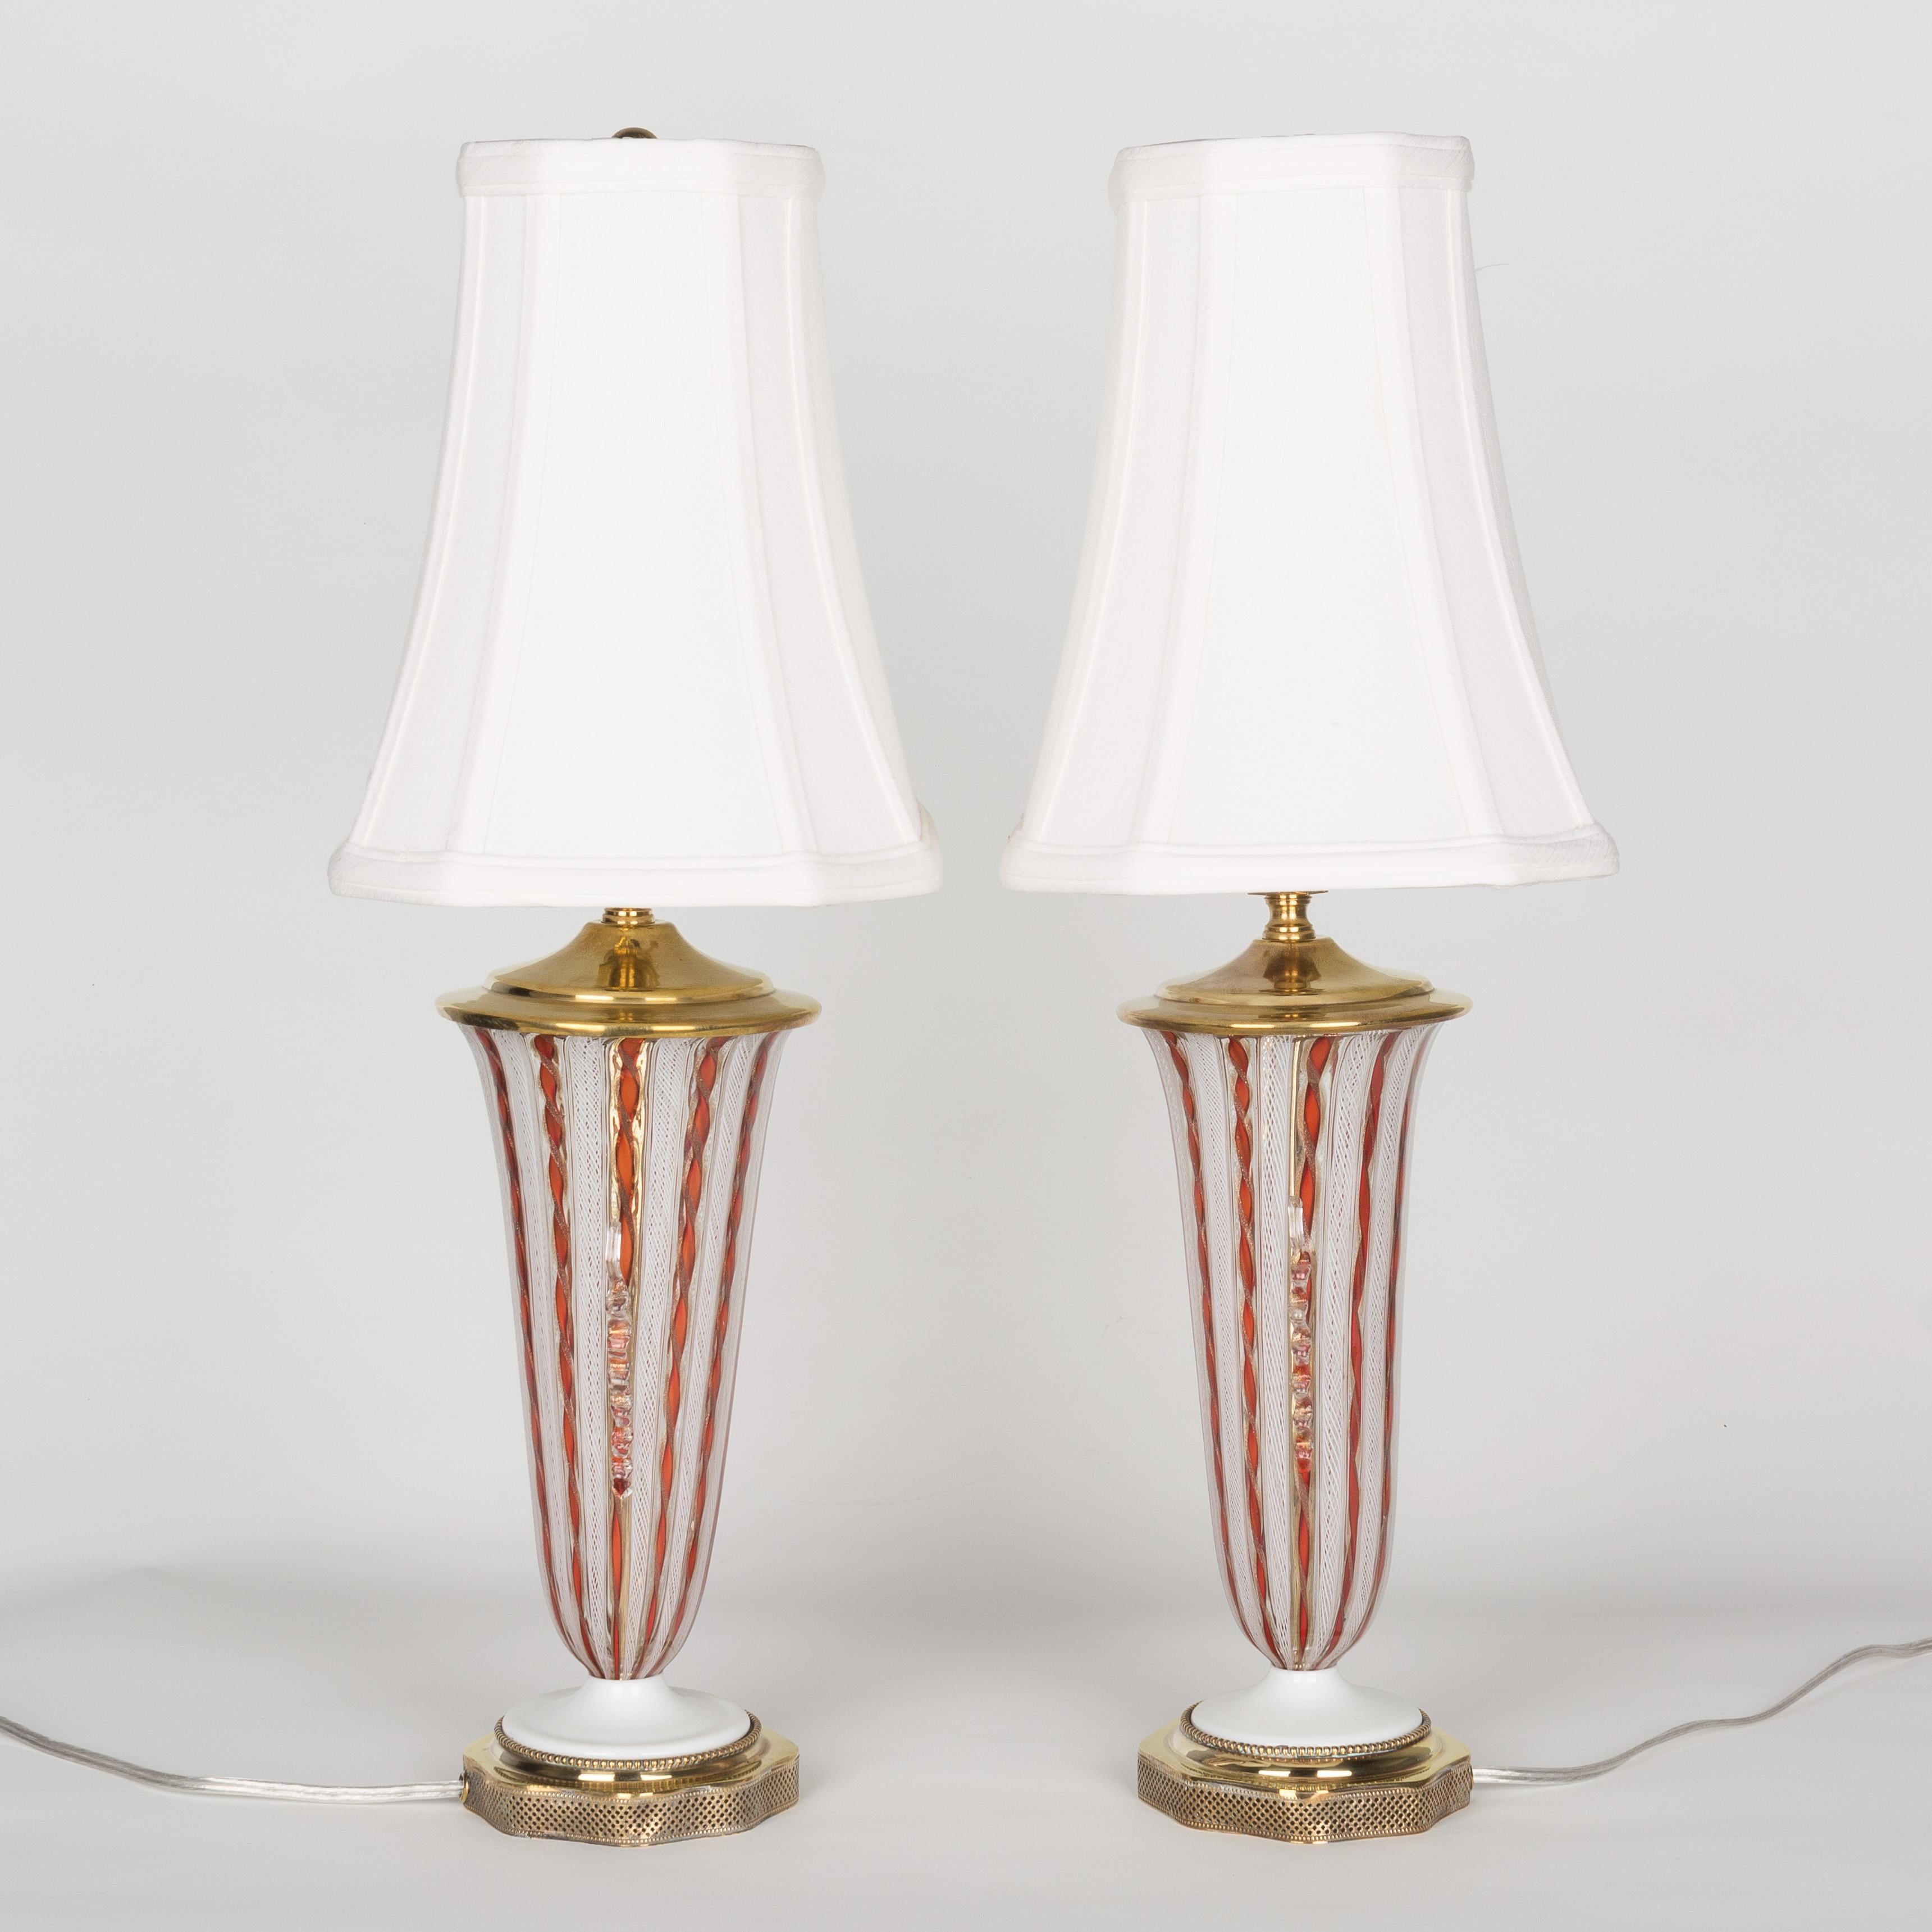 A pair of small Murano latticino glass lamps by A.Ve.M. (Arte Vetraria Muranese). Alternating stripes of Zanfirico white lattice and canes of deep orange red twisted with shimmering copper. Delicate gold infused clear glass ribbons adorn the sides.